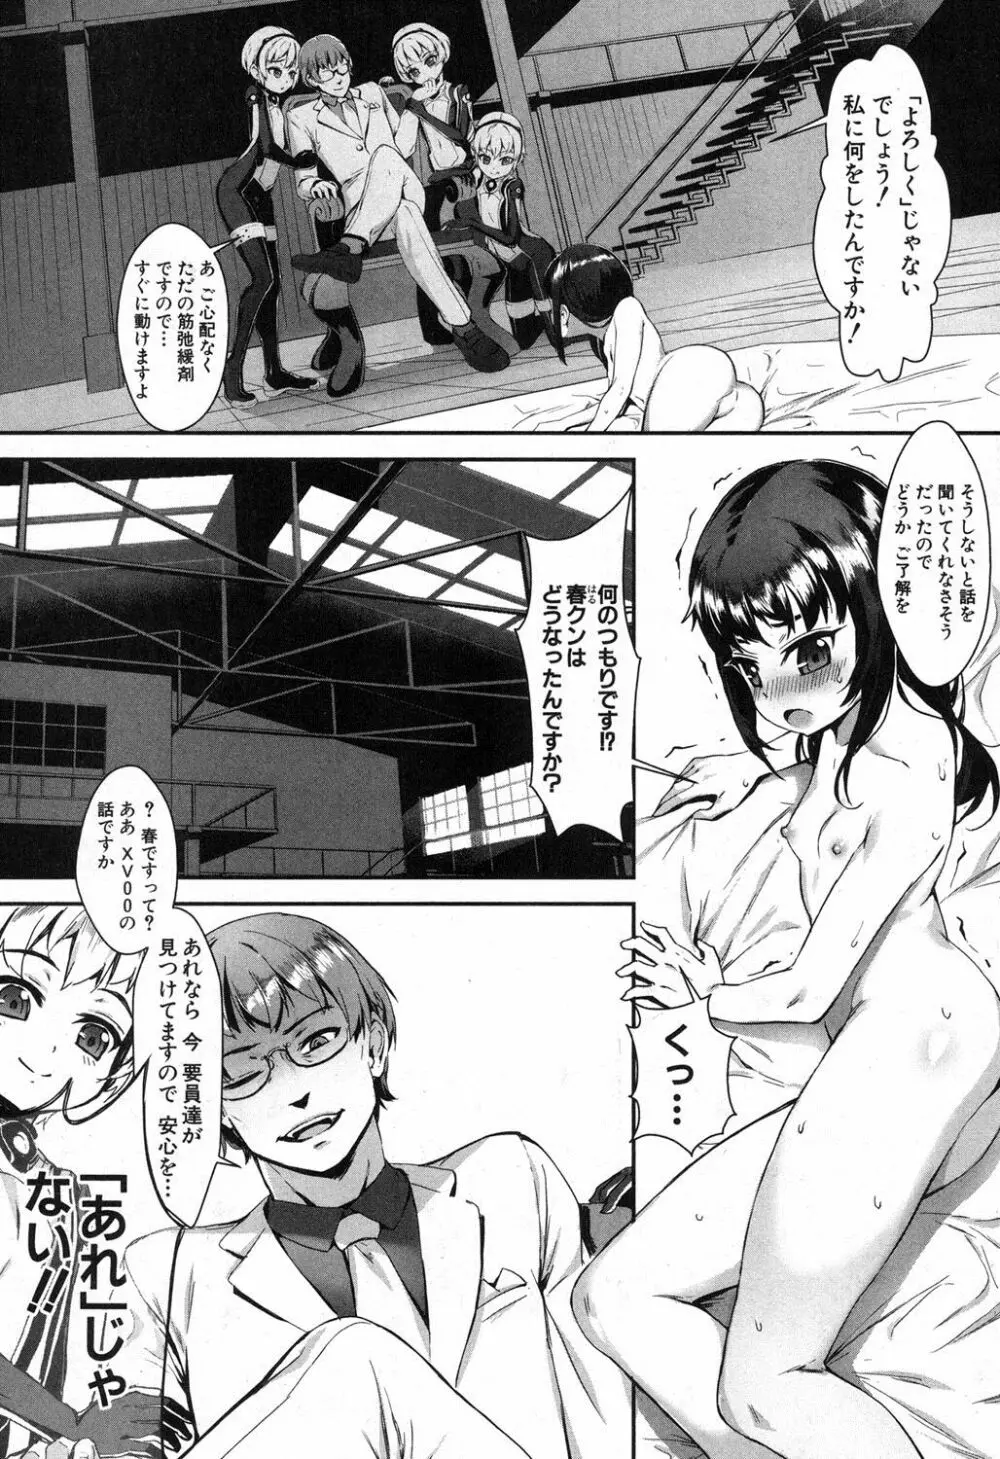 T.F.S 第1-4話 + 御負け Page.82